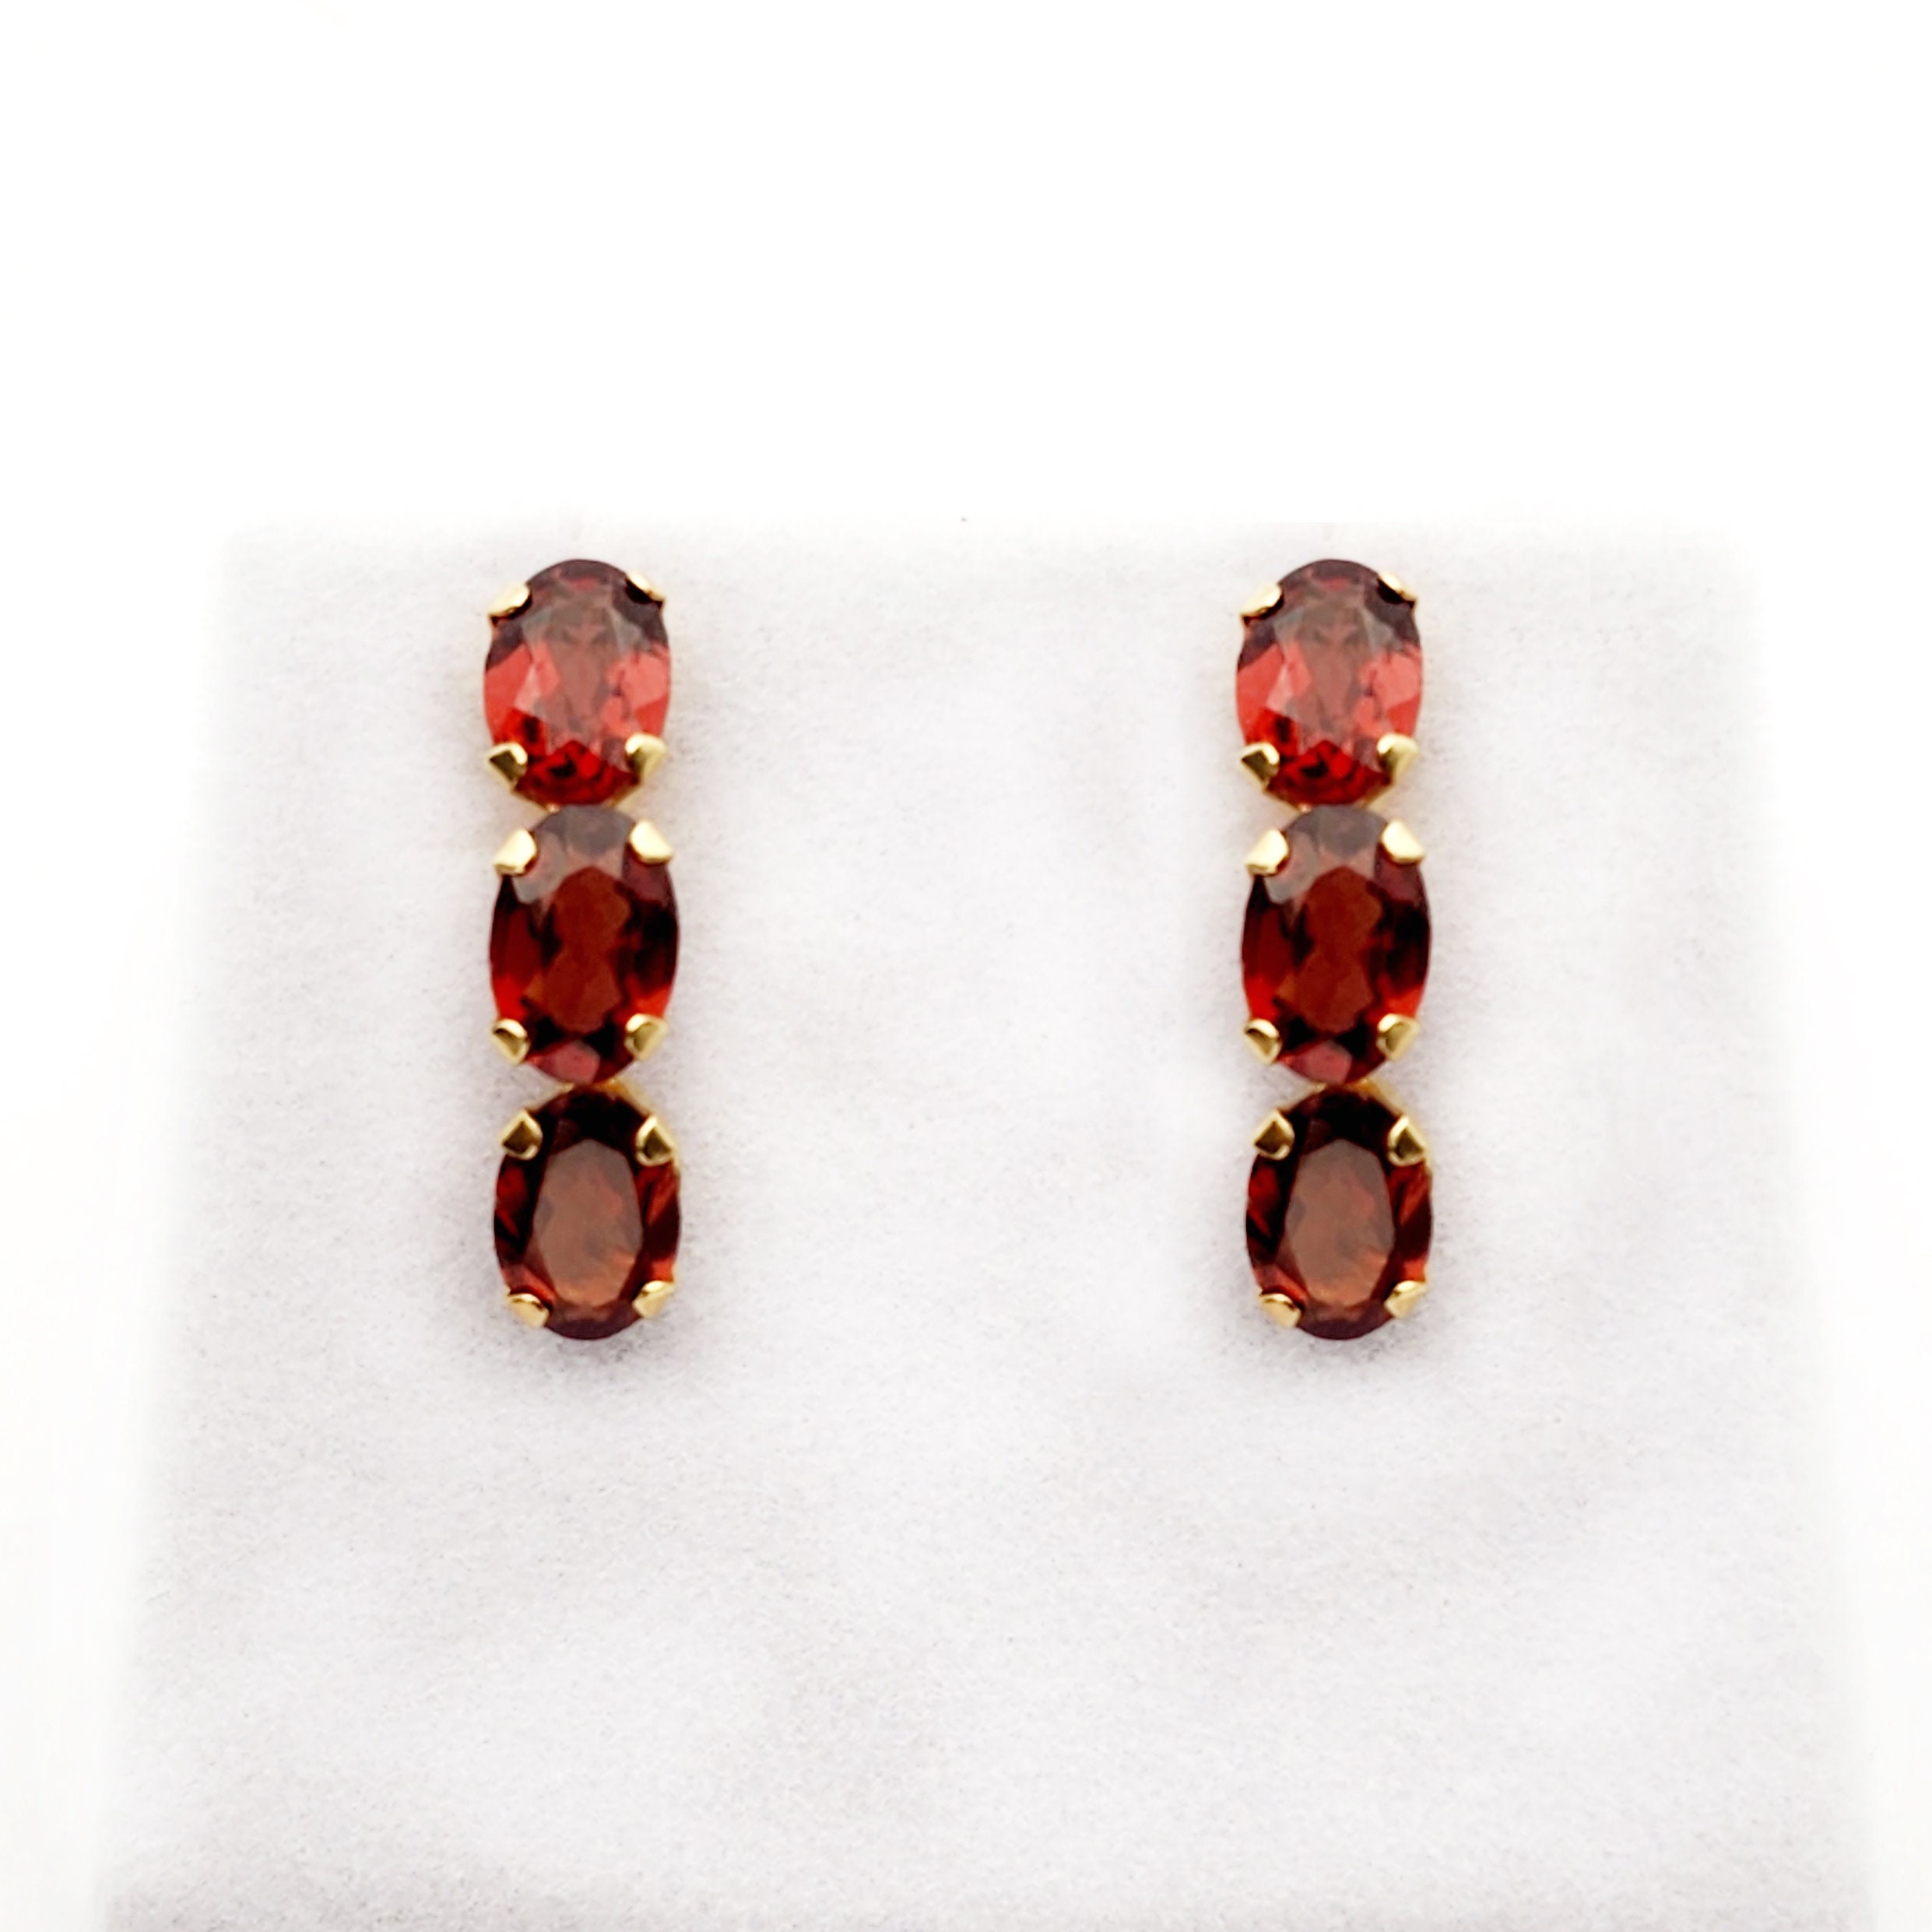 High Quality Jewelry In 925 Sterling Silver Real Garnet Gemstone Oval Shape Stud  Earrings At Wholesale Price | Garnet gemstone, Garnet, 925 sterling silver